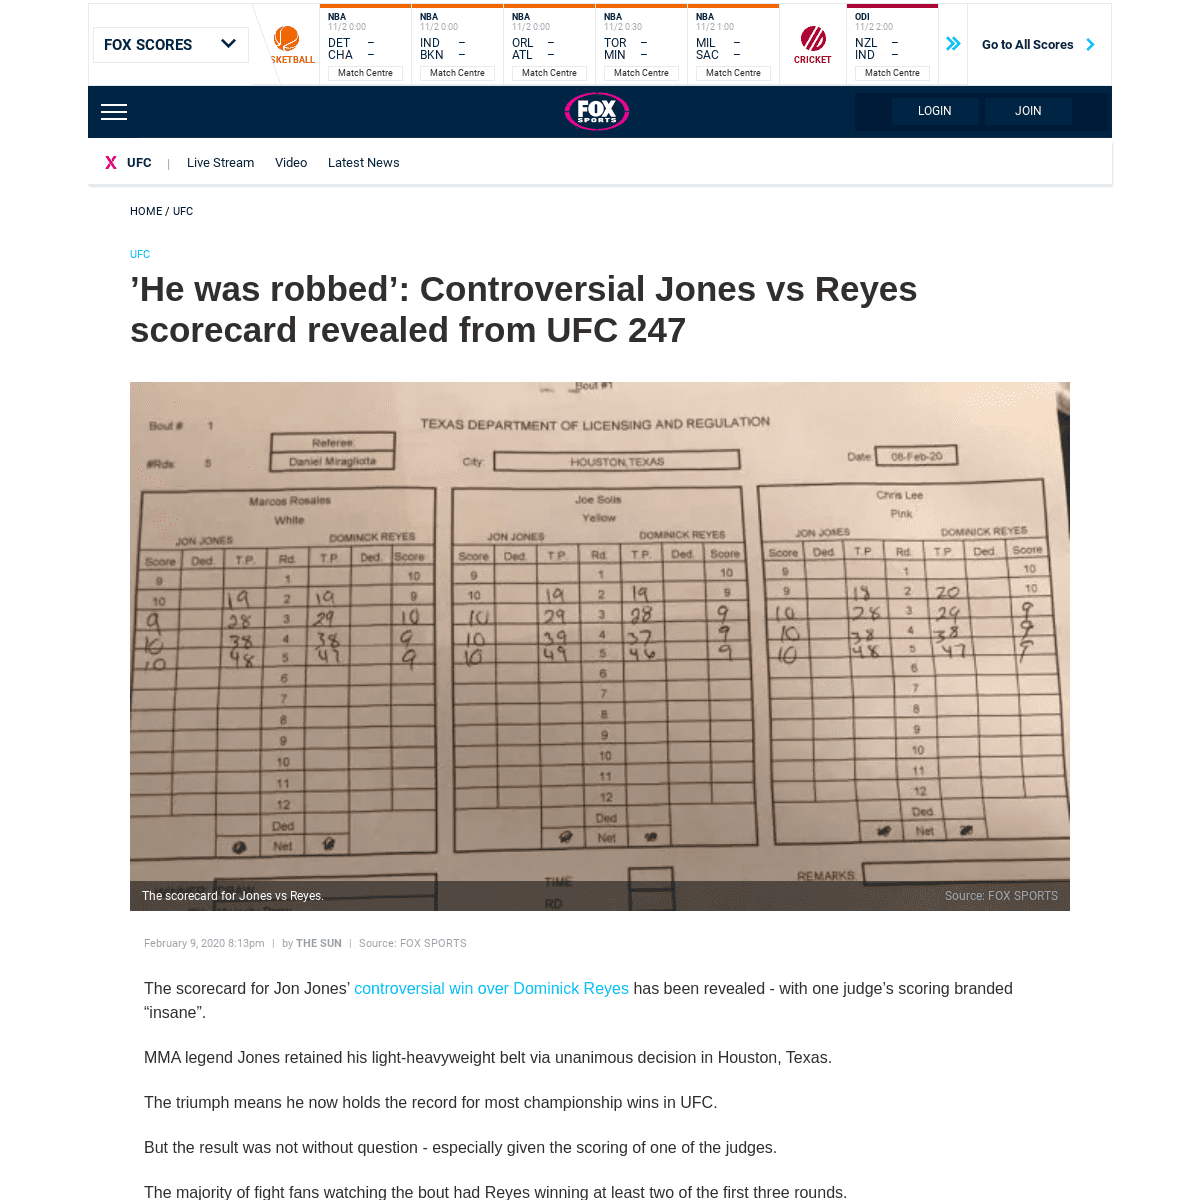 A complete backup of www.foxsports.com.au/ufc/he-was-robbed-controversial-jones-vs-reyes-scorecard-revealed-from-ufc-247/news-st